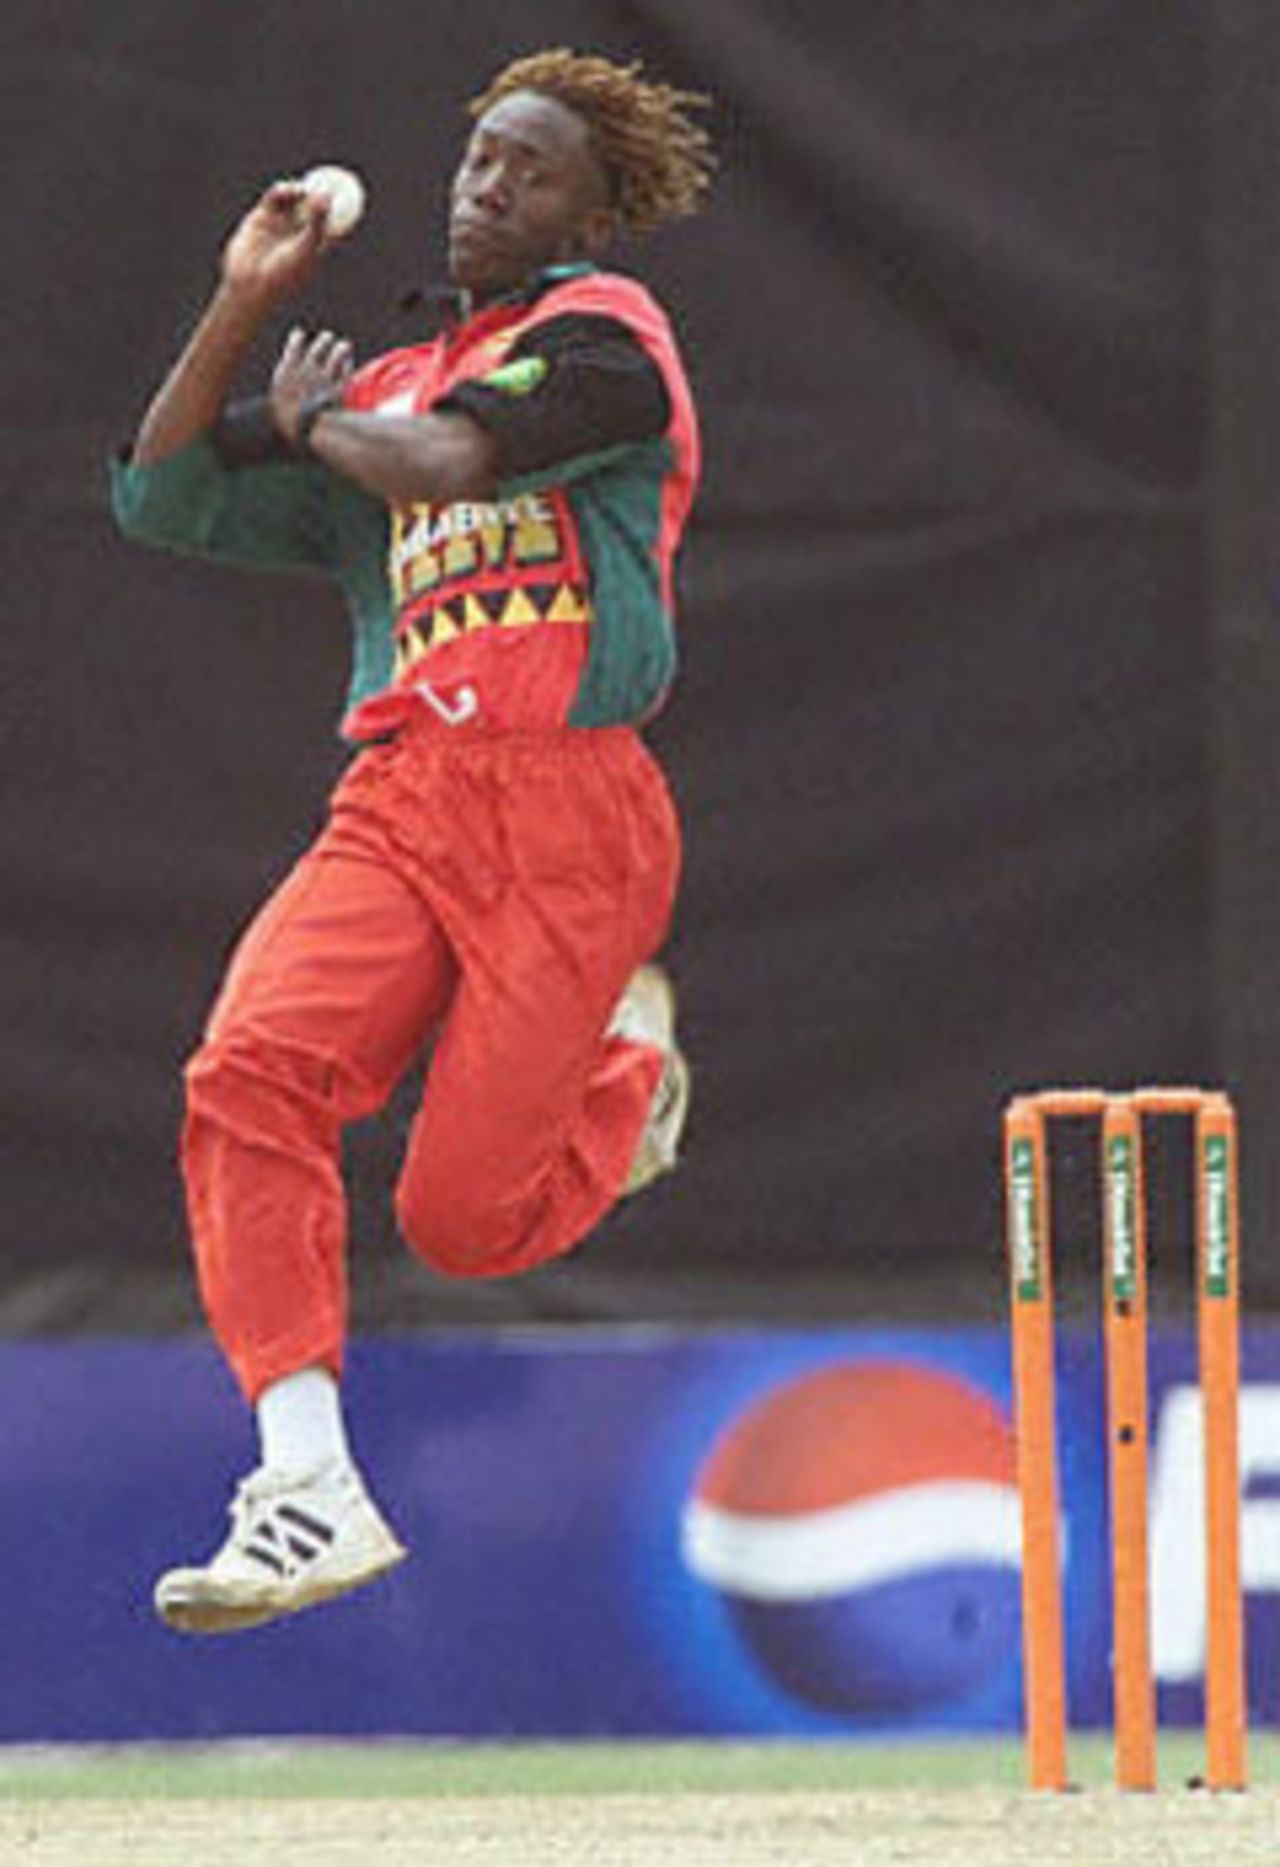 Olonga takes the final leap before delivering the ball, ICC KnockOut, 2000/01, 3rd Quarter Final, New Zealand v Zimbabwe, Gymkhana Club Ground, Nairobi, 09 October 2000.